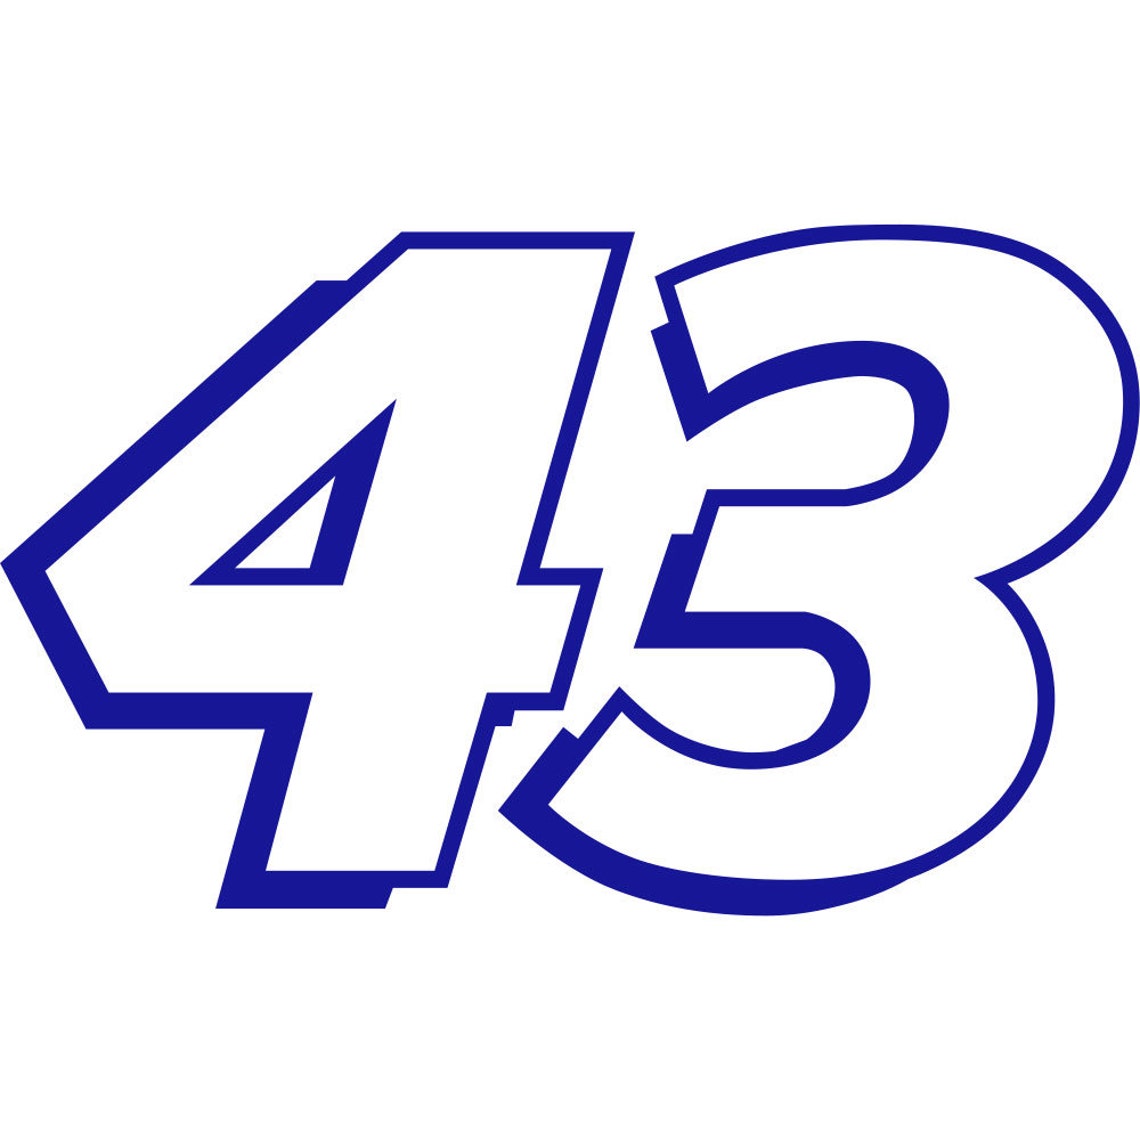 Richard Petty 43 Decal Accessory two Piece Two Layer - Etsy